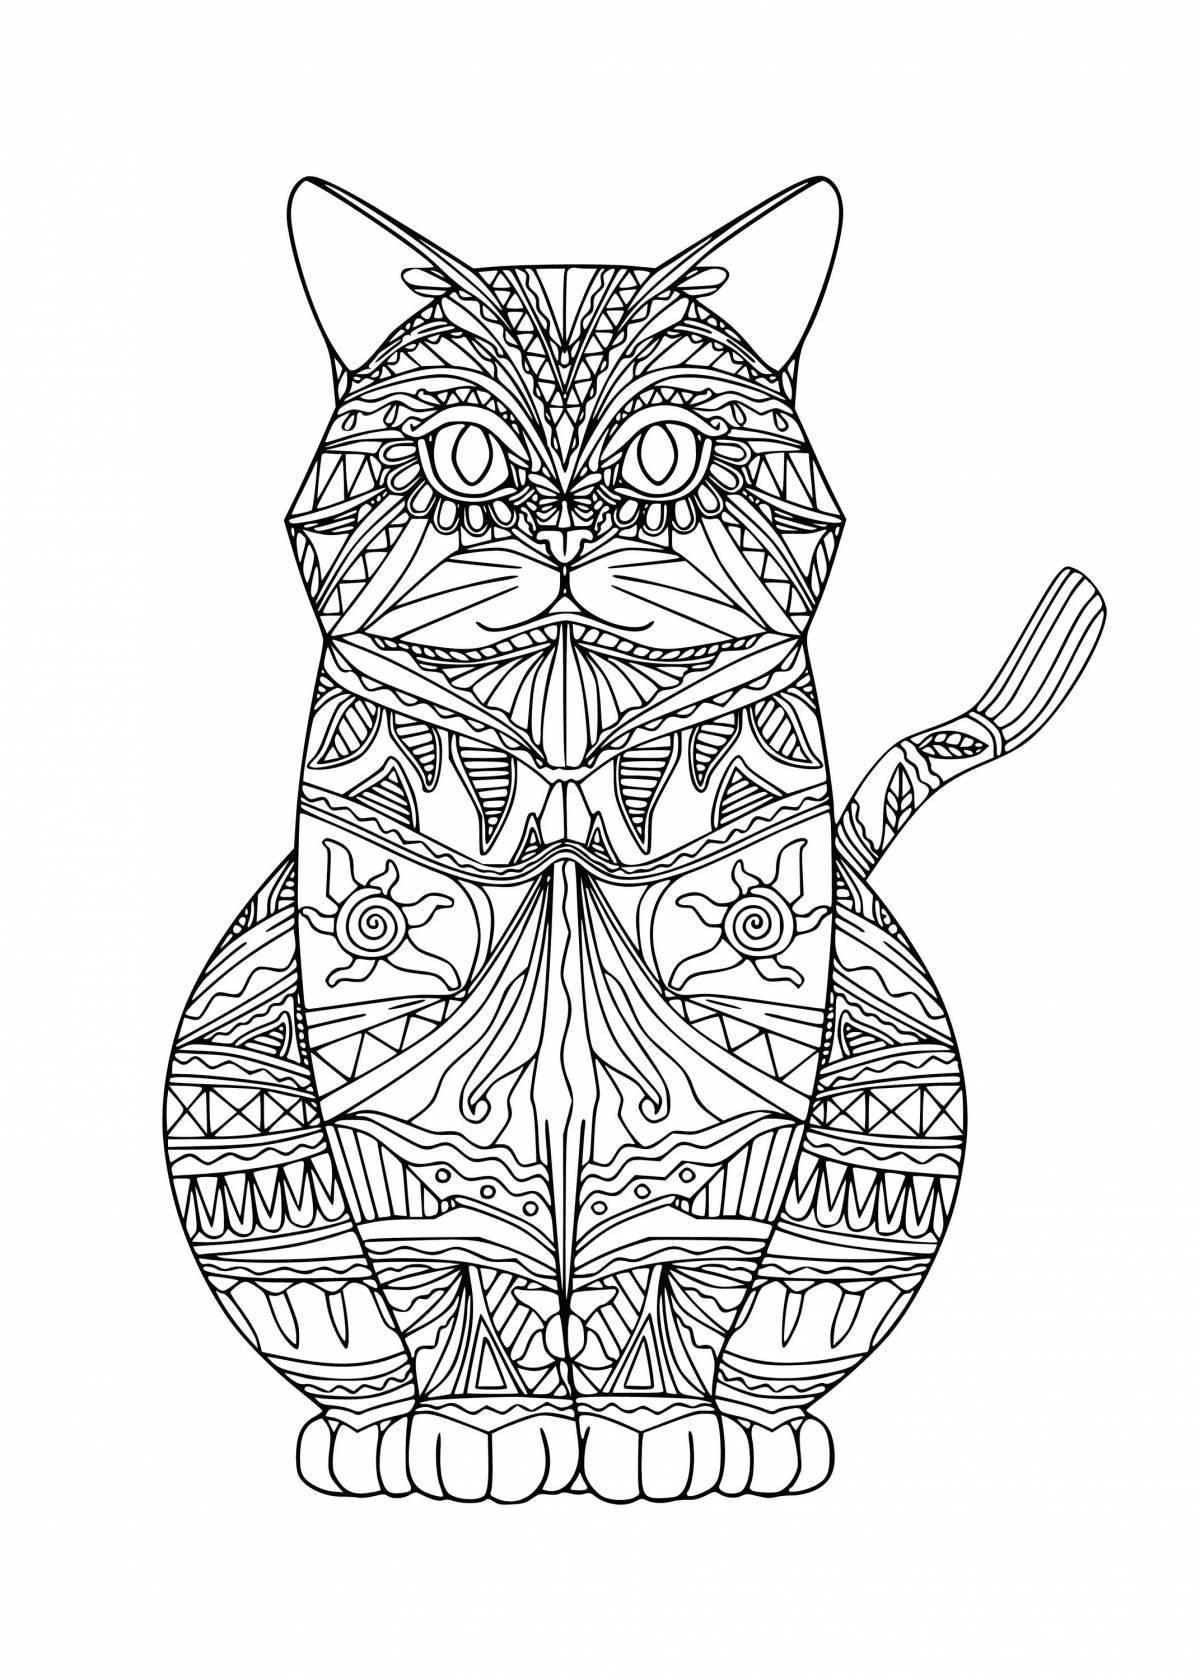 Fluffy cat coloring page art